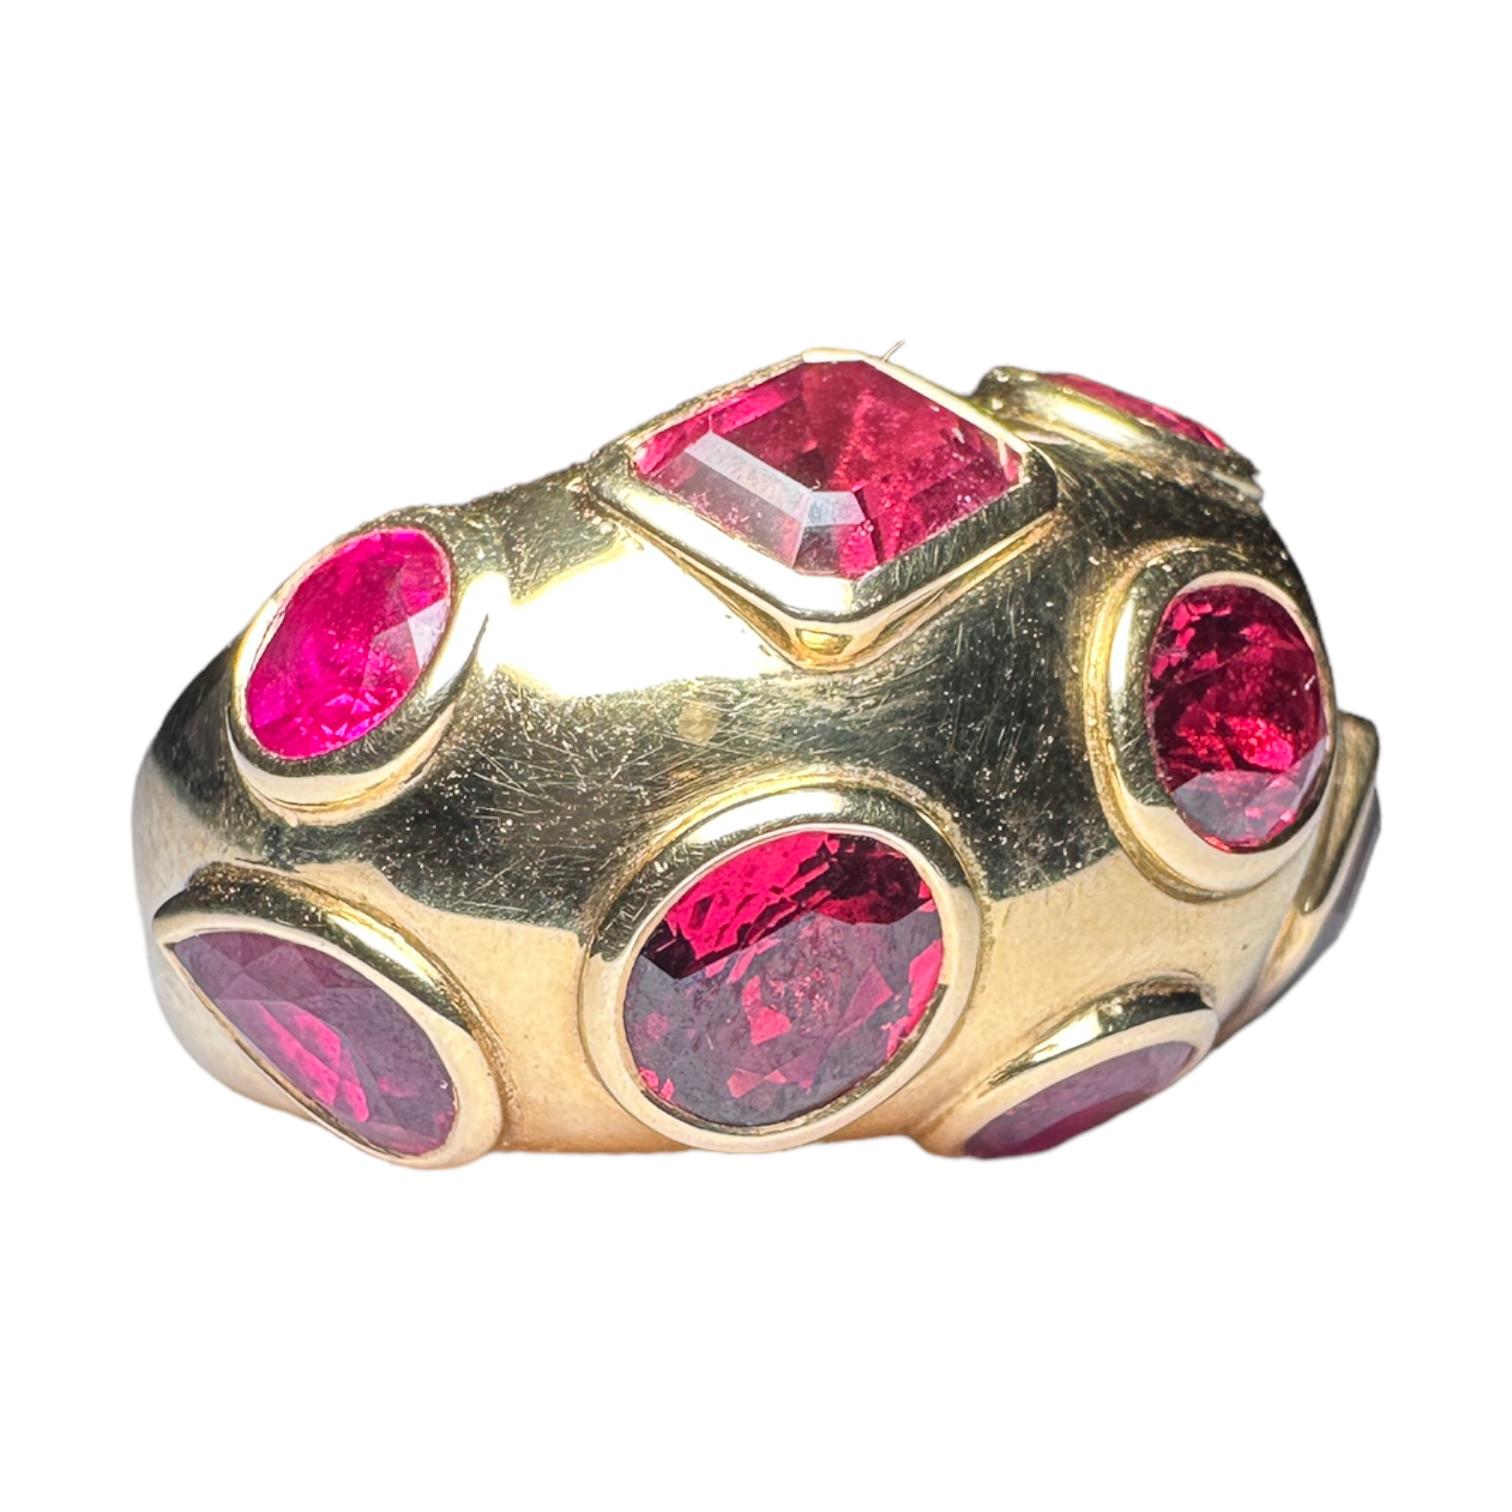 18k Gold Ring with Rubies, Rubellite Tourmalines and Red Spinels For Sale 4